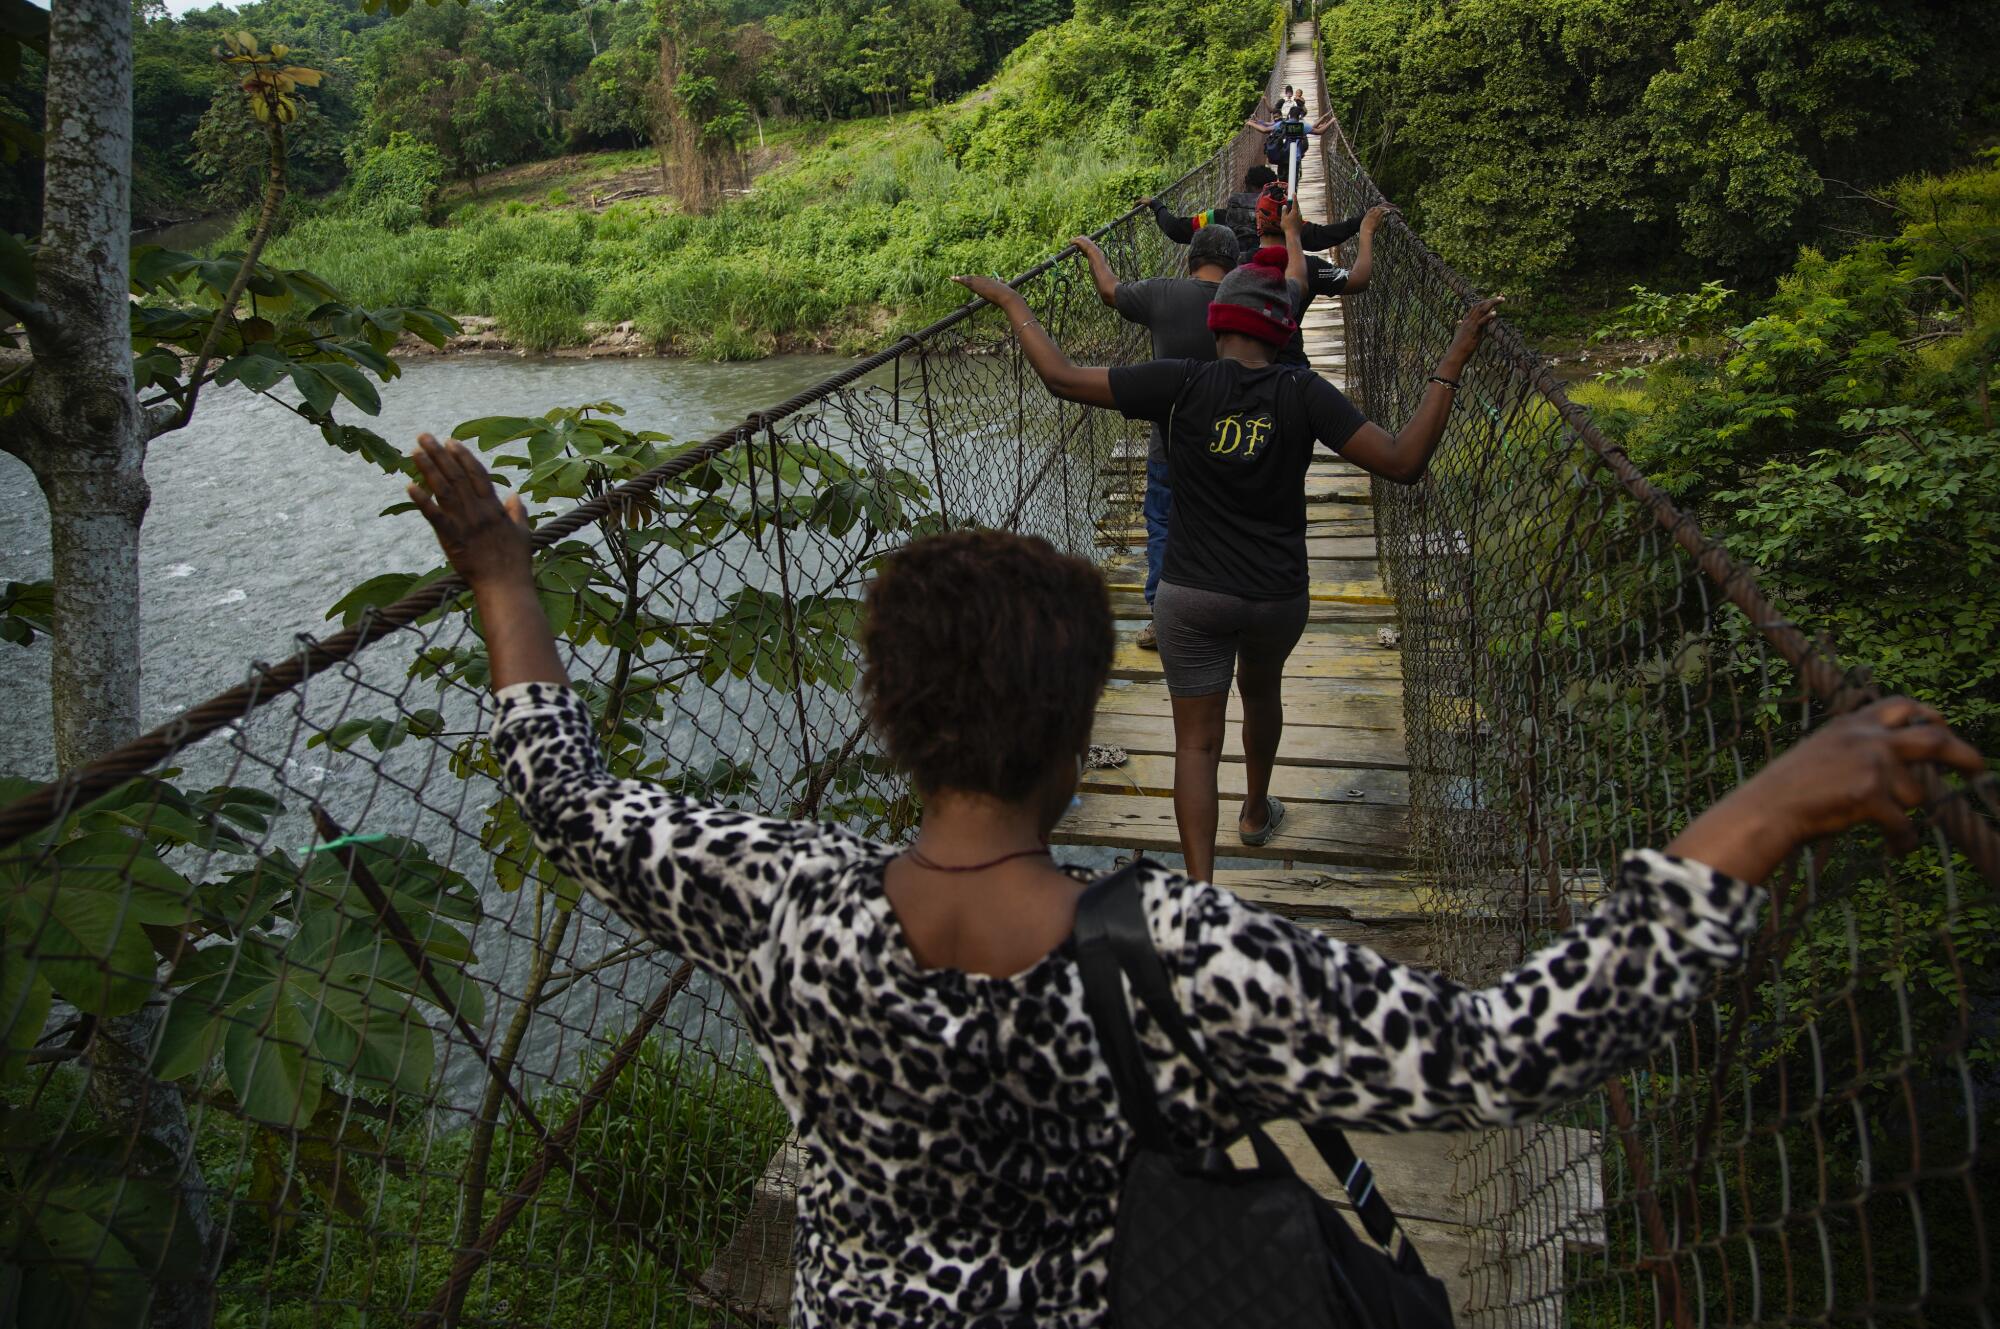 A group of Haitian migrants grip the sides of a bridge as they cross the Cahoacán river